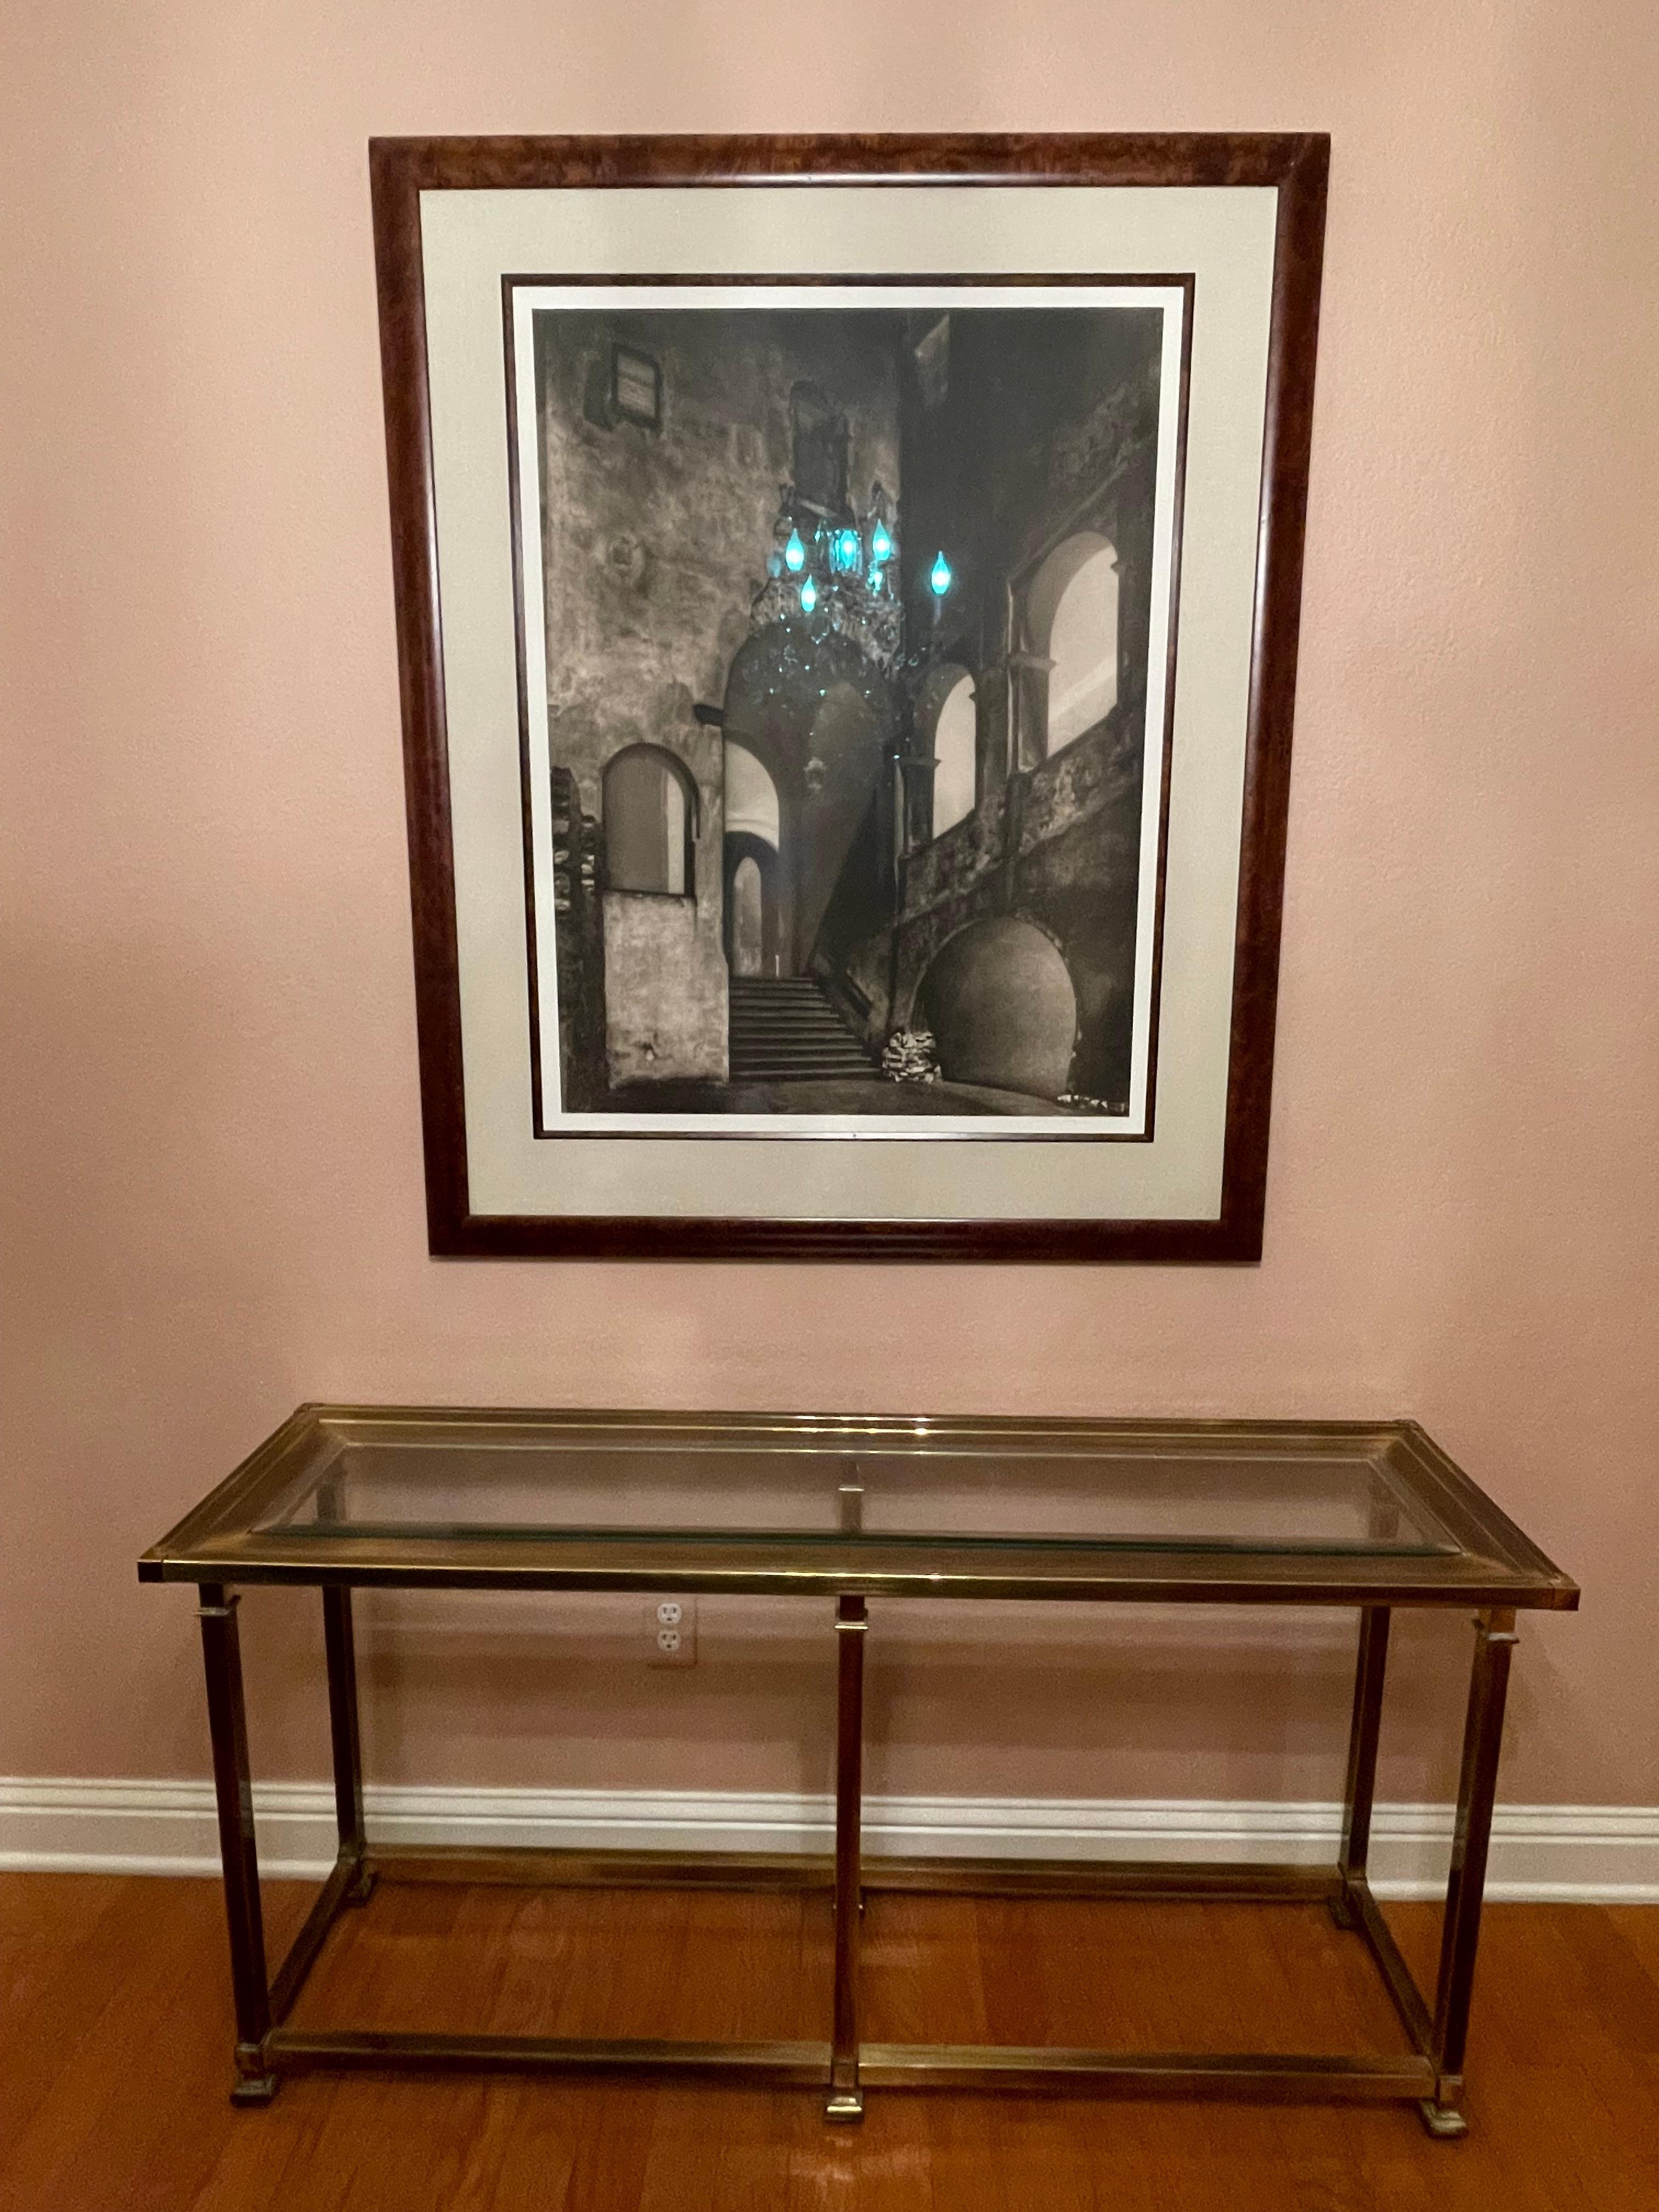 Handsome, versatile brass and glass console table! It's vintage 1960's from France...

With a beautiful antique brass patina, I love some of the design details that reflect the refined French design-eye for detail. You won't easily find a piece like